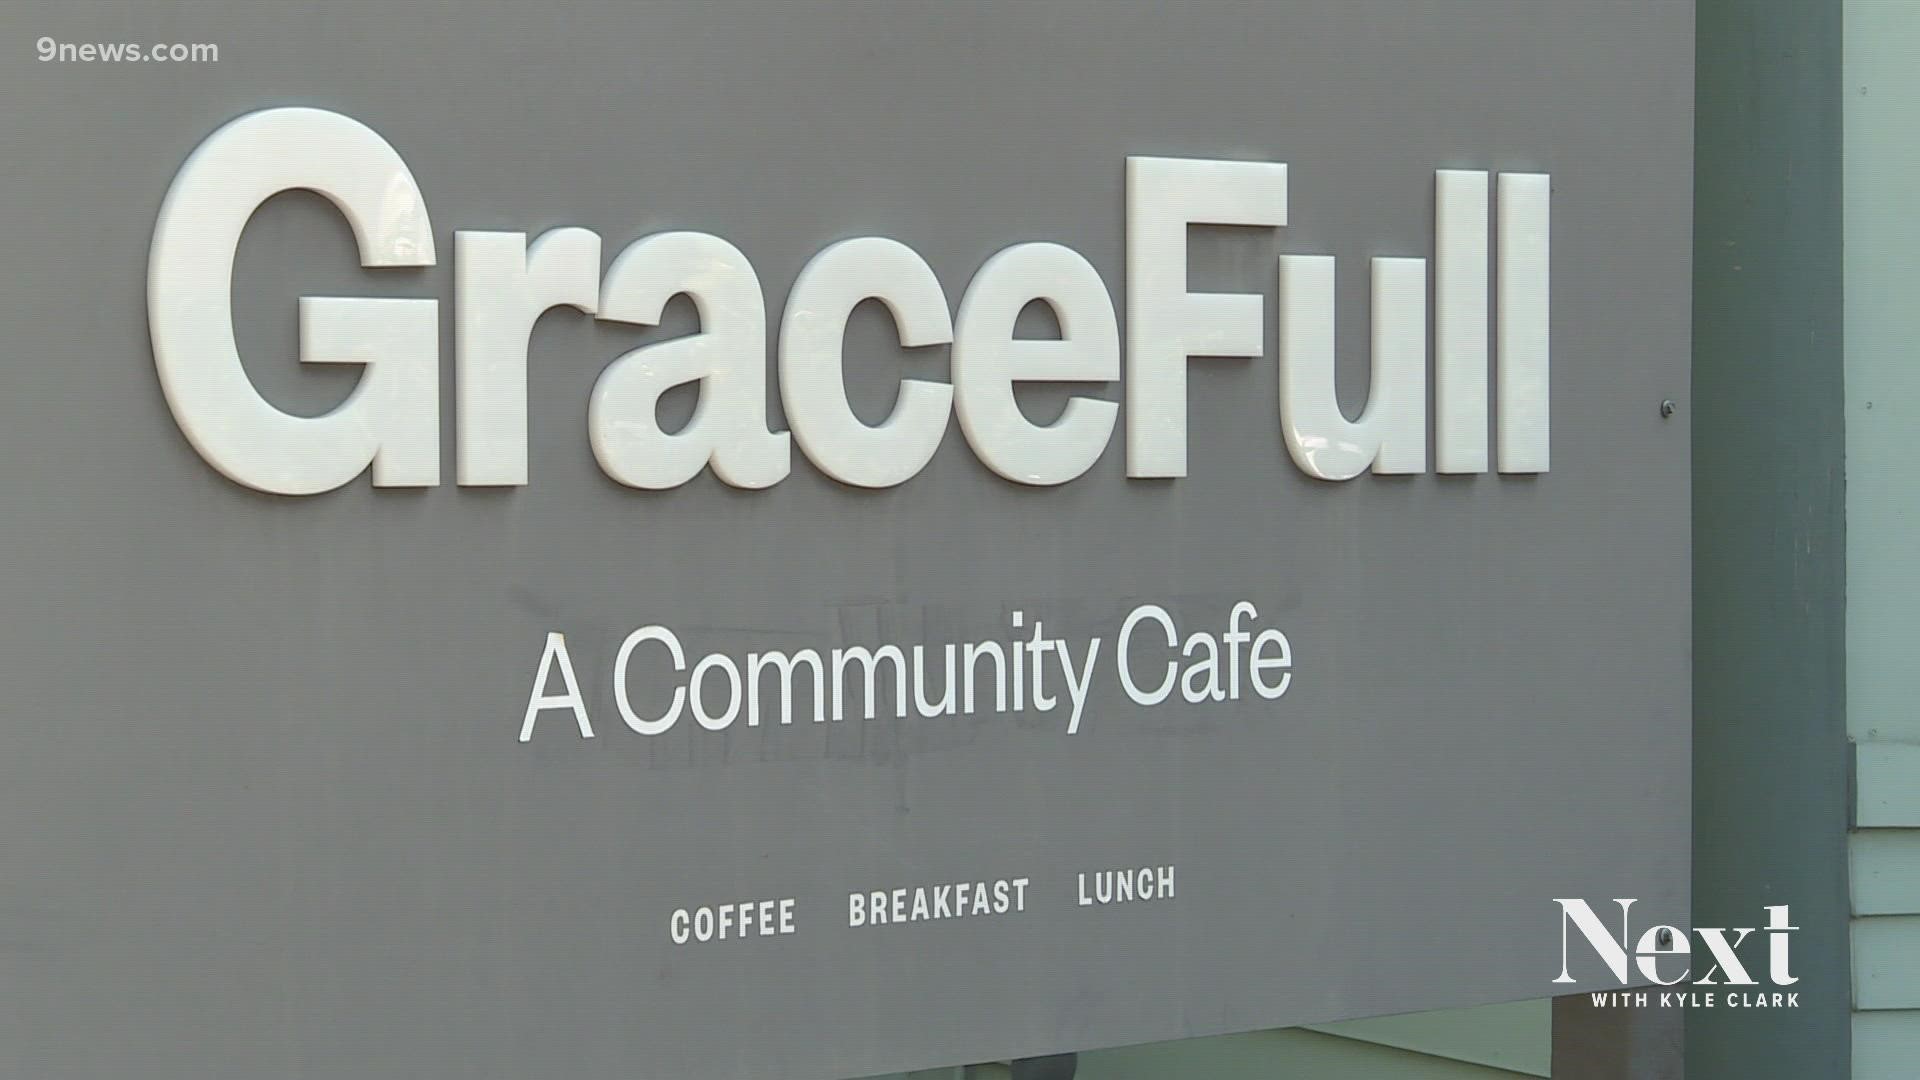 GraceFull Cafe in Littleton admits some neighbors worry about attracting people experiencing homelessness. Others in the community are looking at solutions.